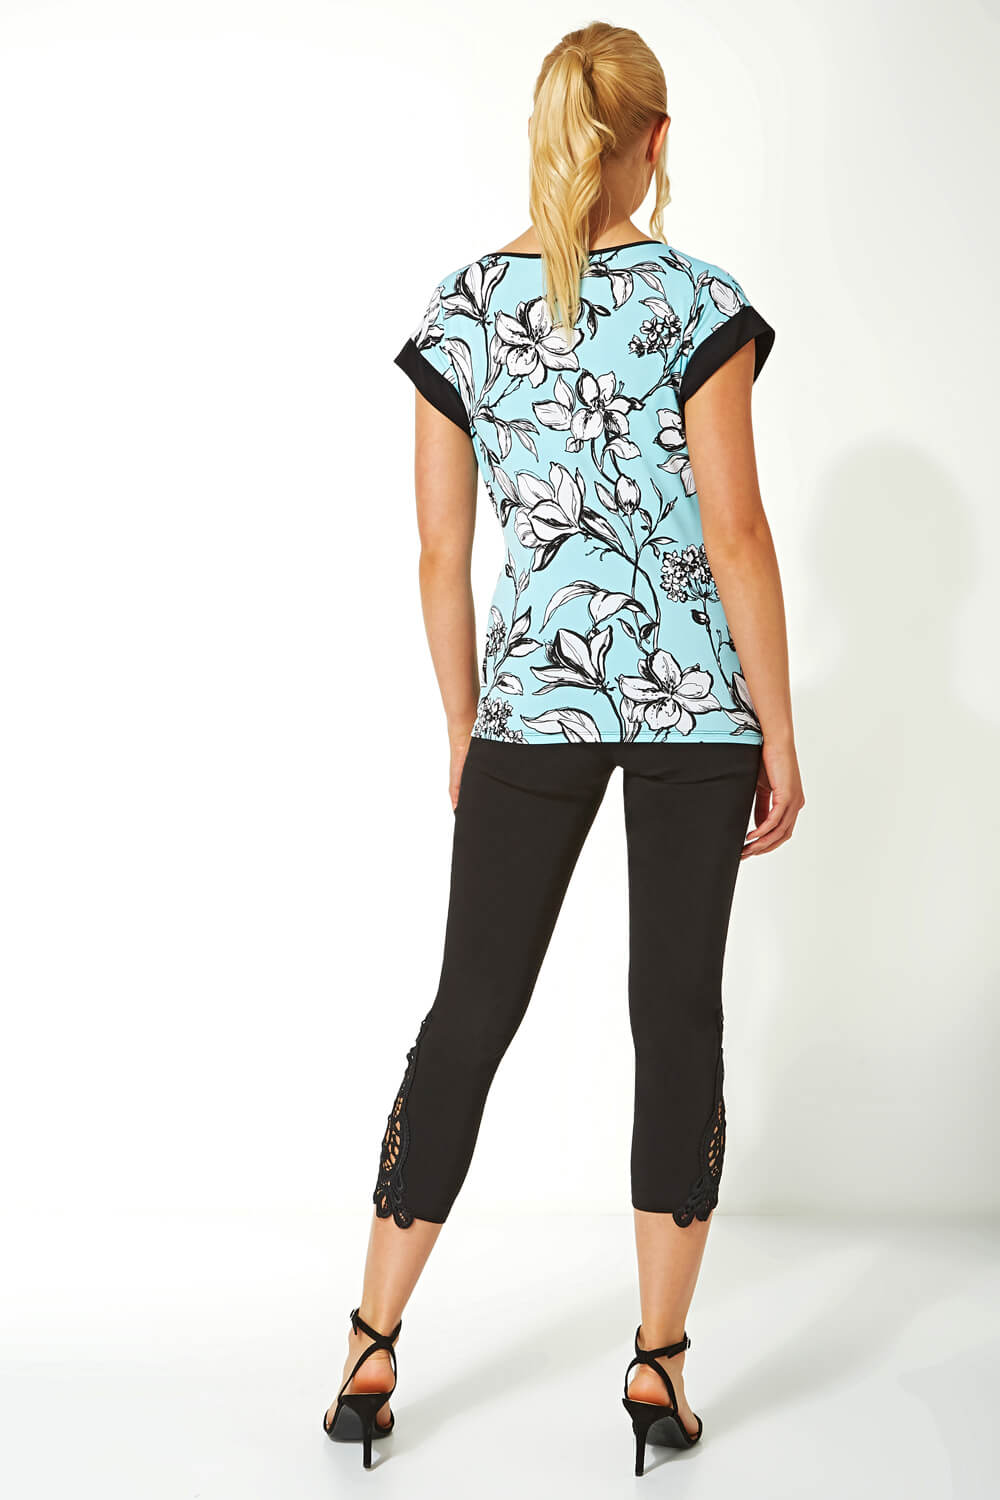 Turquoise Tie Waist Floral Top, Image 2 of 5